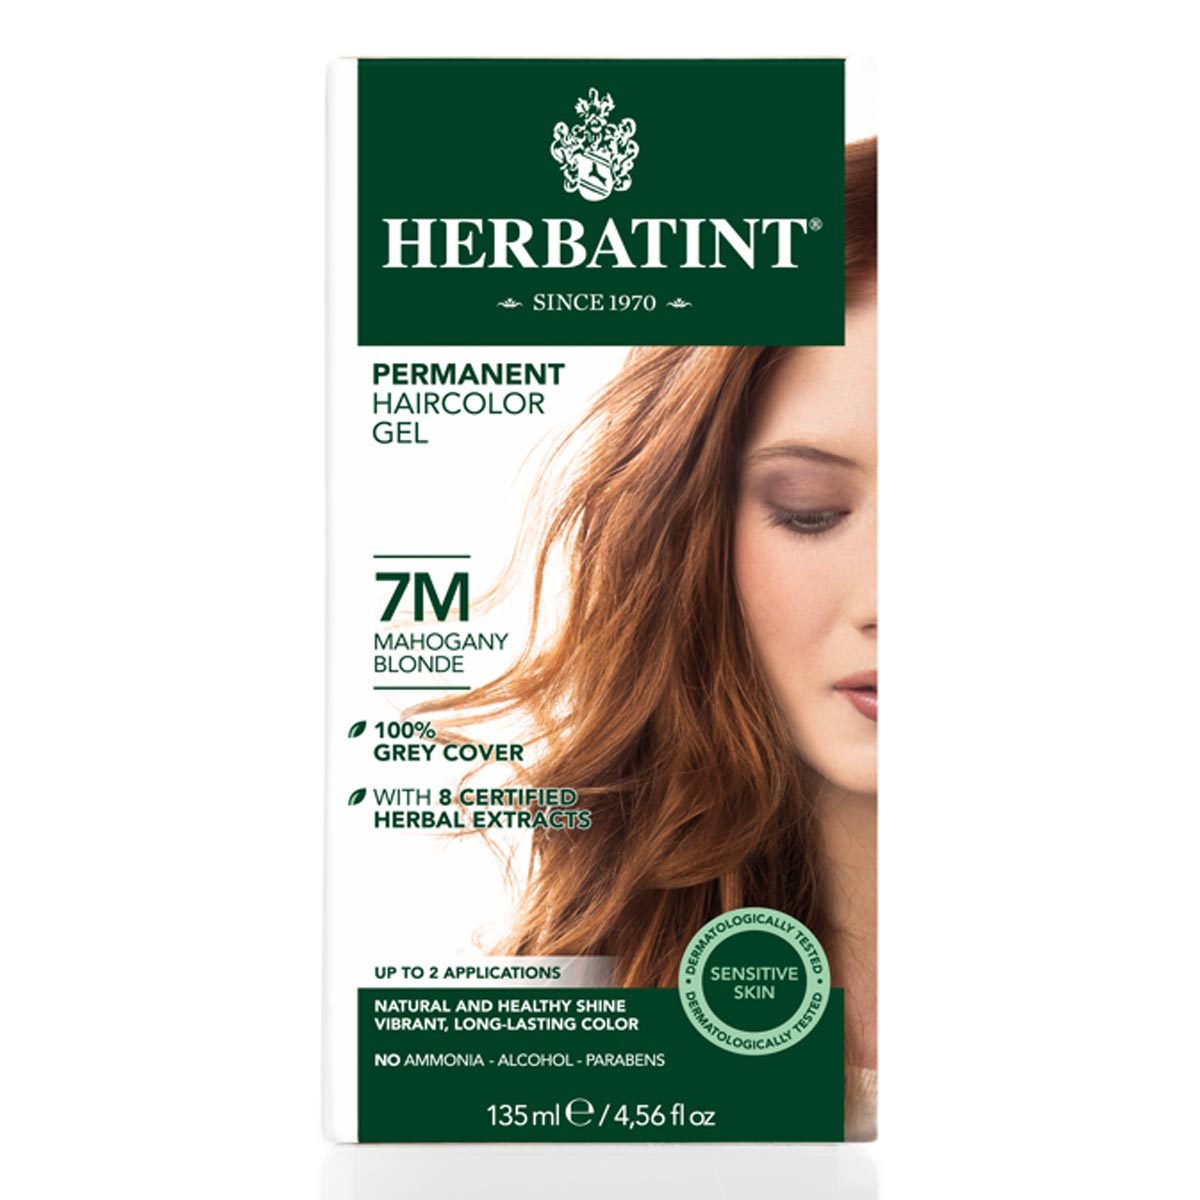 Primary image of 7M Mahogany Blonde Permanent Hair Color Gel